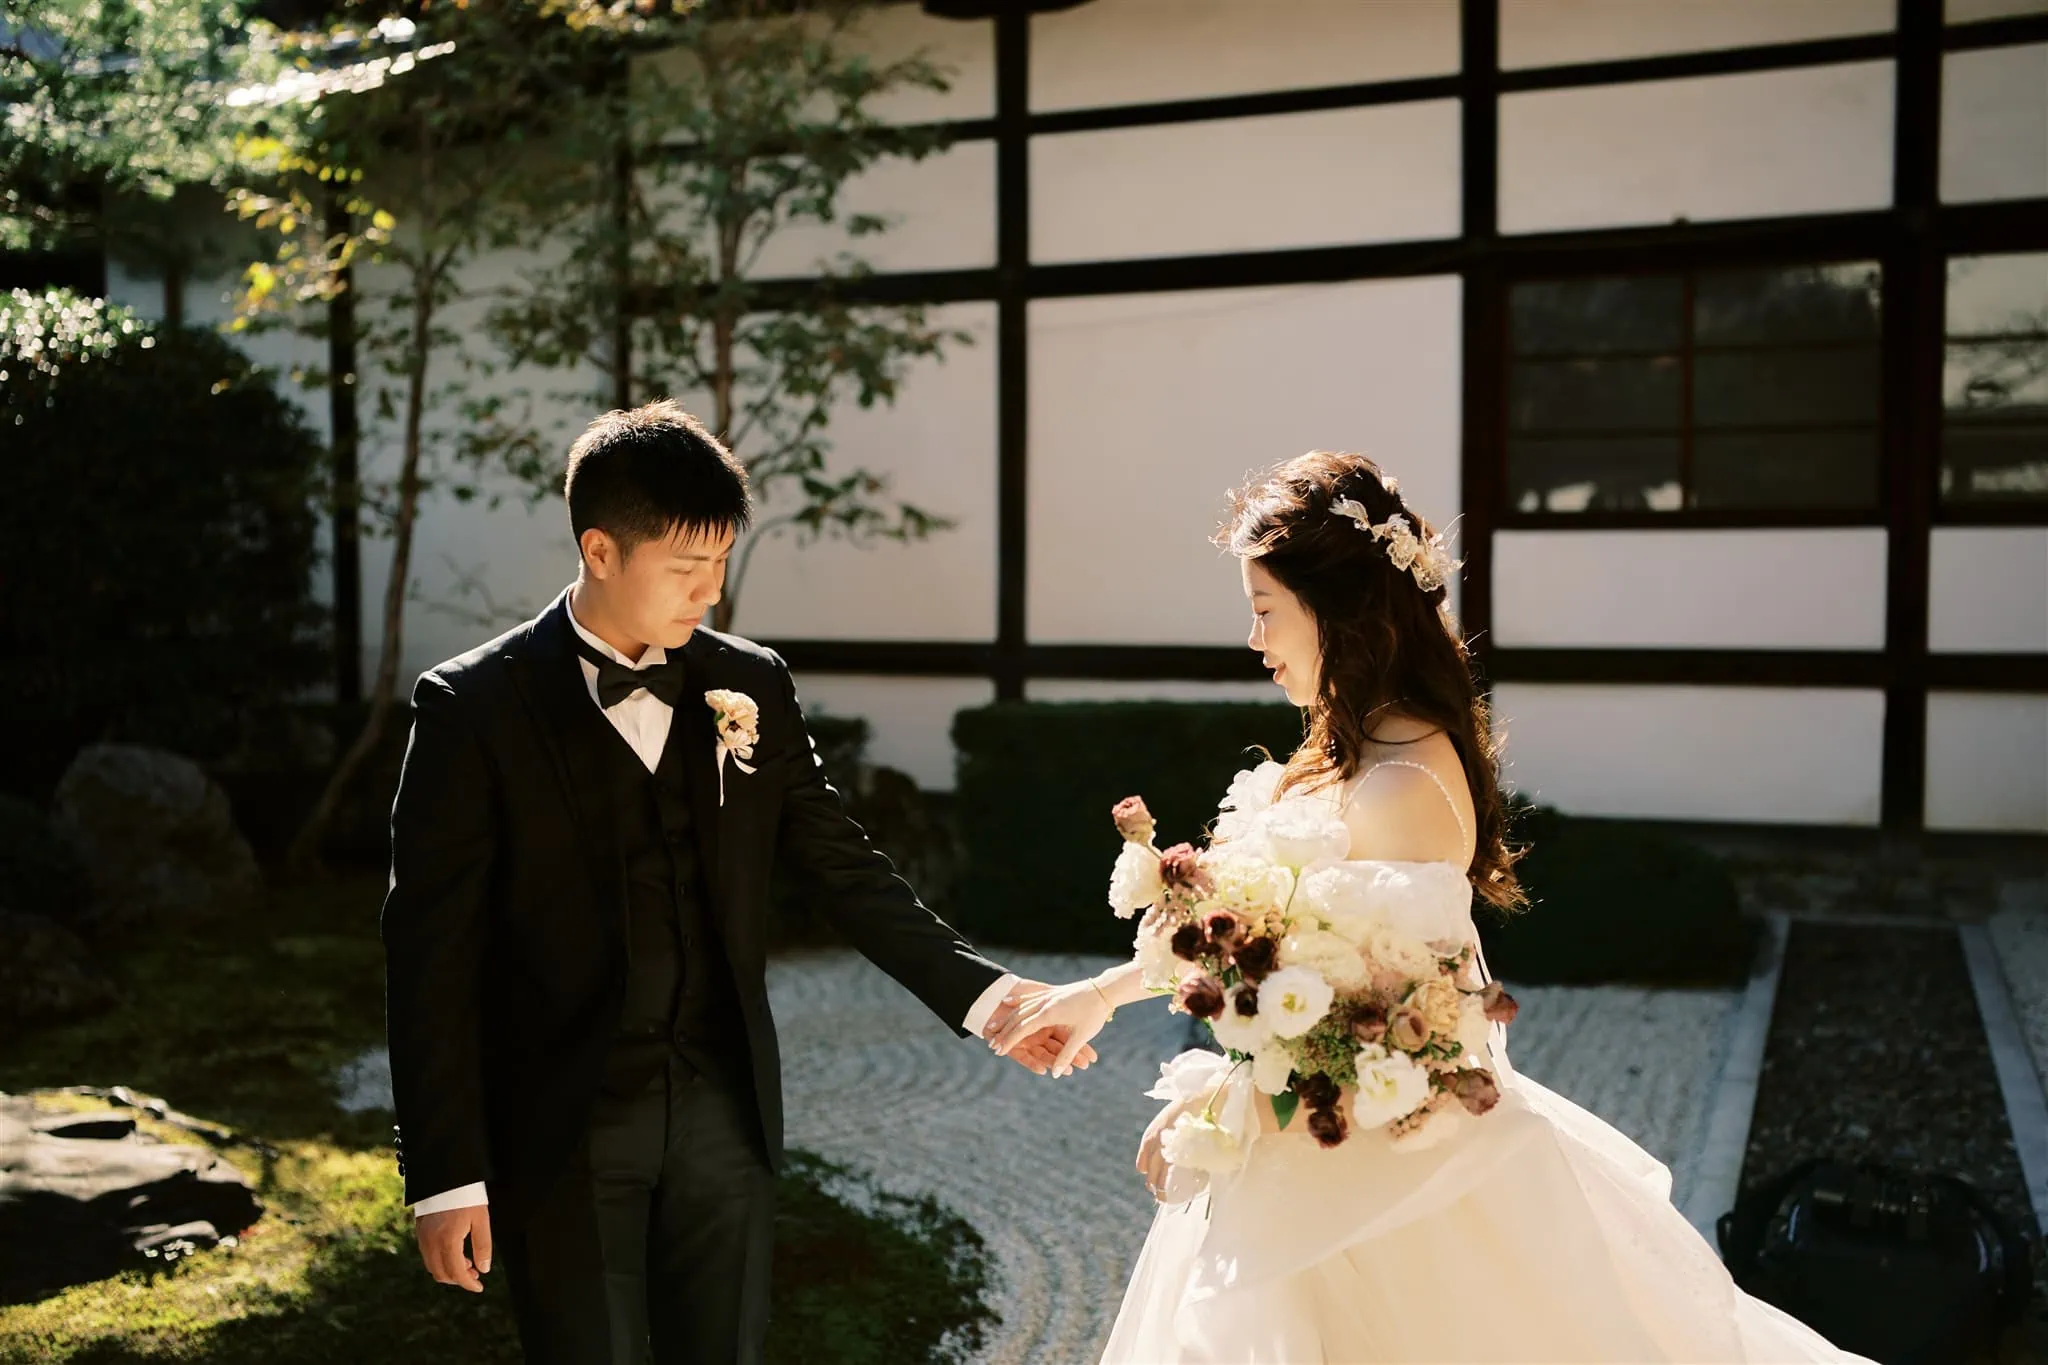 Kyoto Tokyo Japan Elopement Wedding Photographer, Planner & Videographer | A bride and groom holding hands in front of a traditional Japanese house, captured beautifully by a Japan elopement photographer.